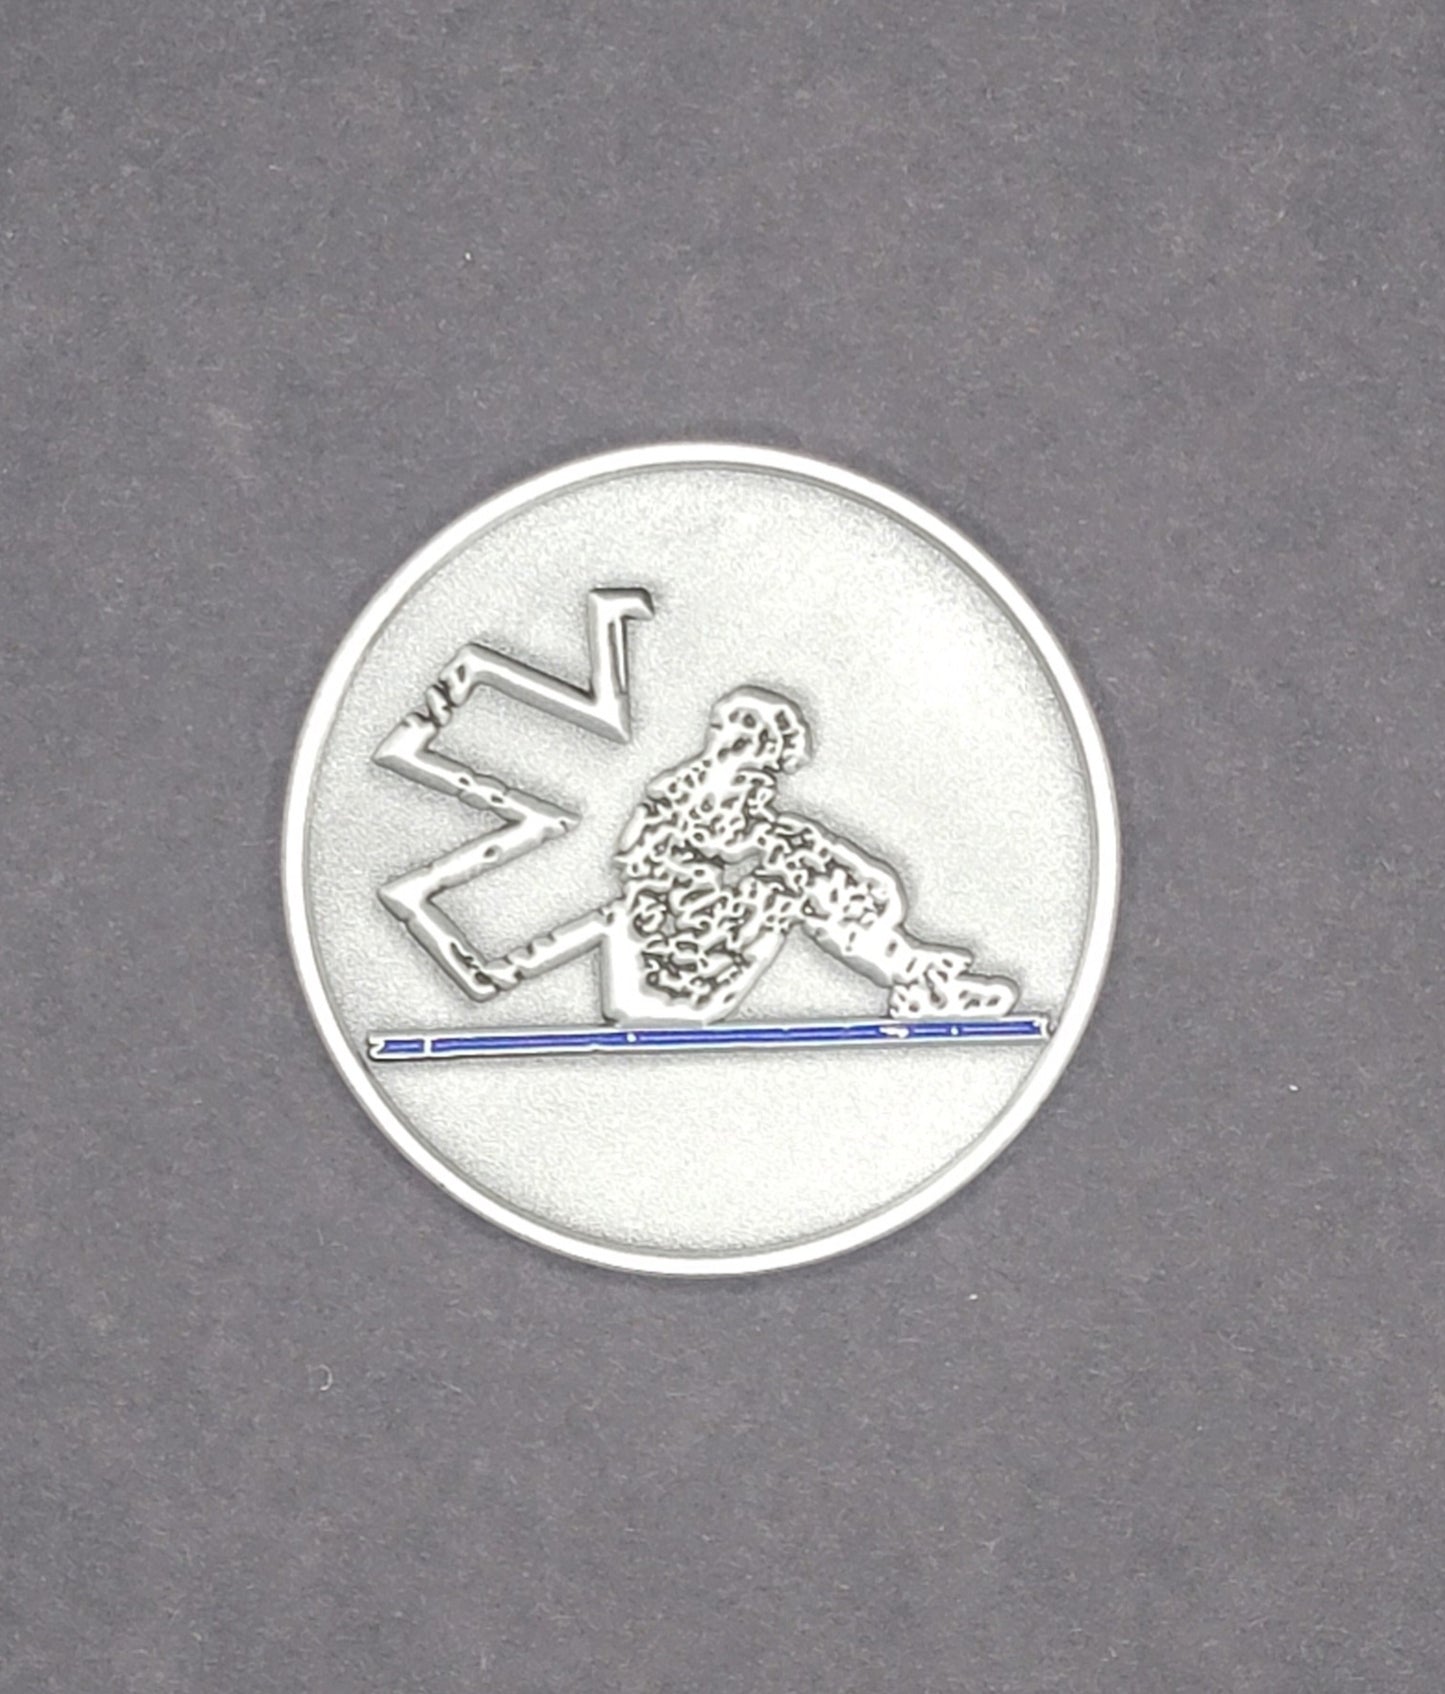 Stay Fit 4 Duty Challenge Coin